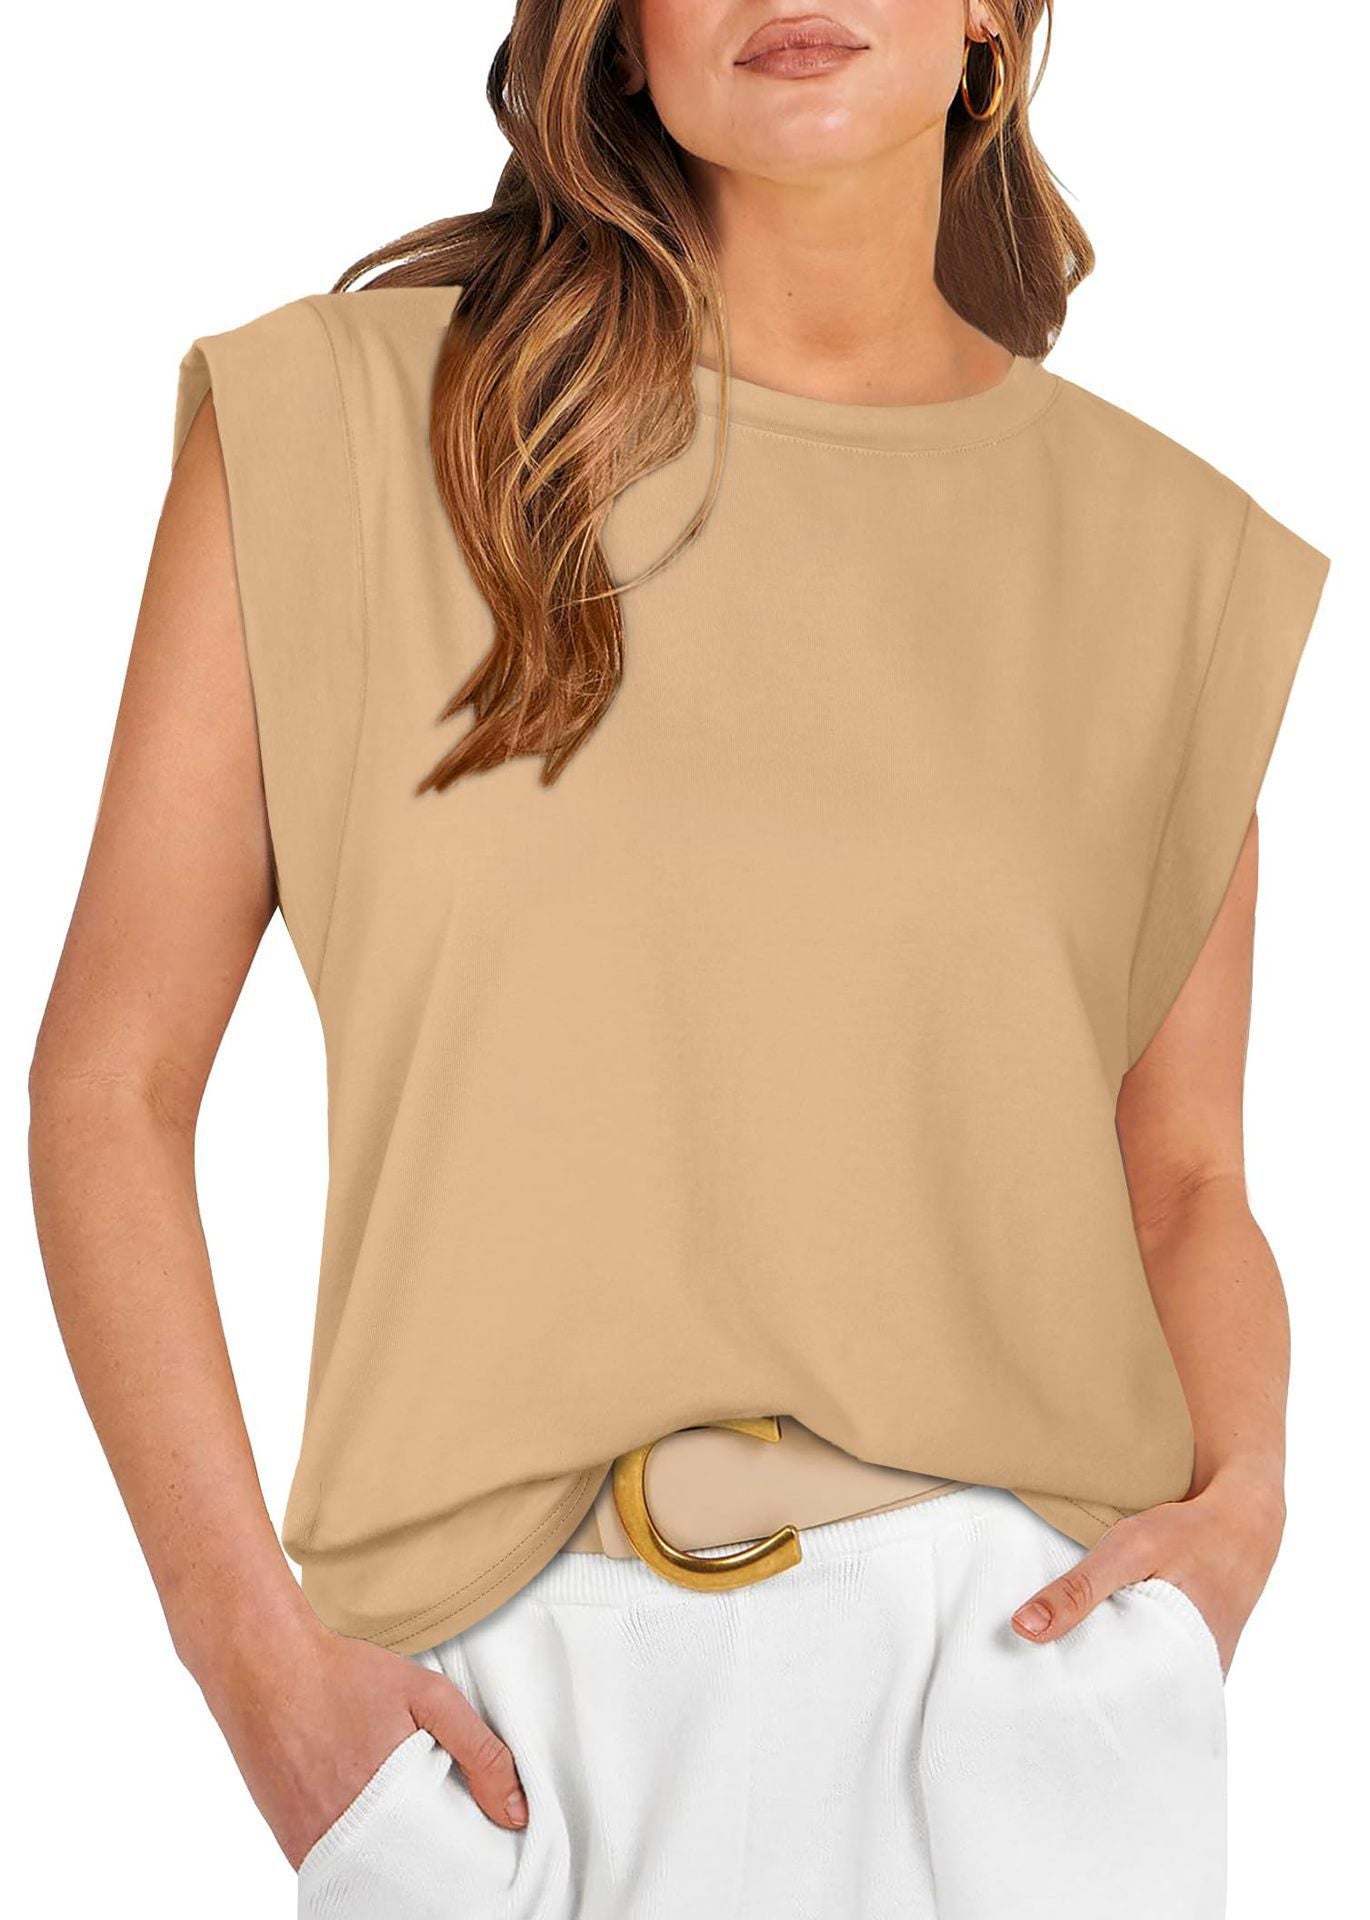 Women's Two-piece Round Neck T-shirt Summer Casual Blouses